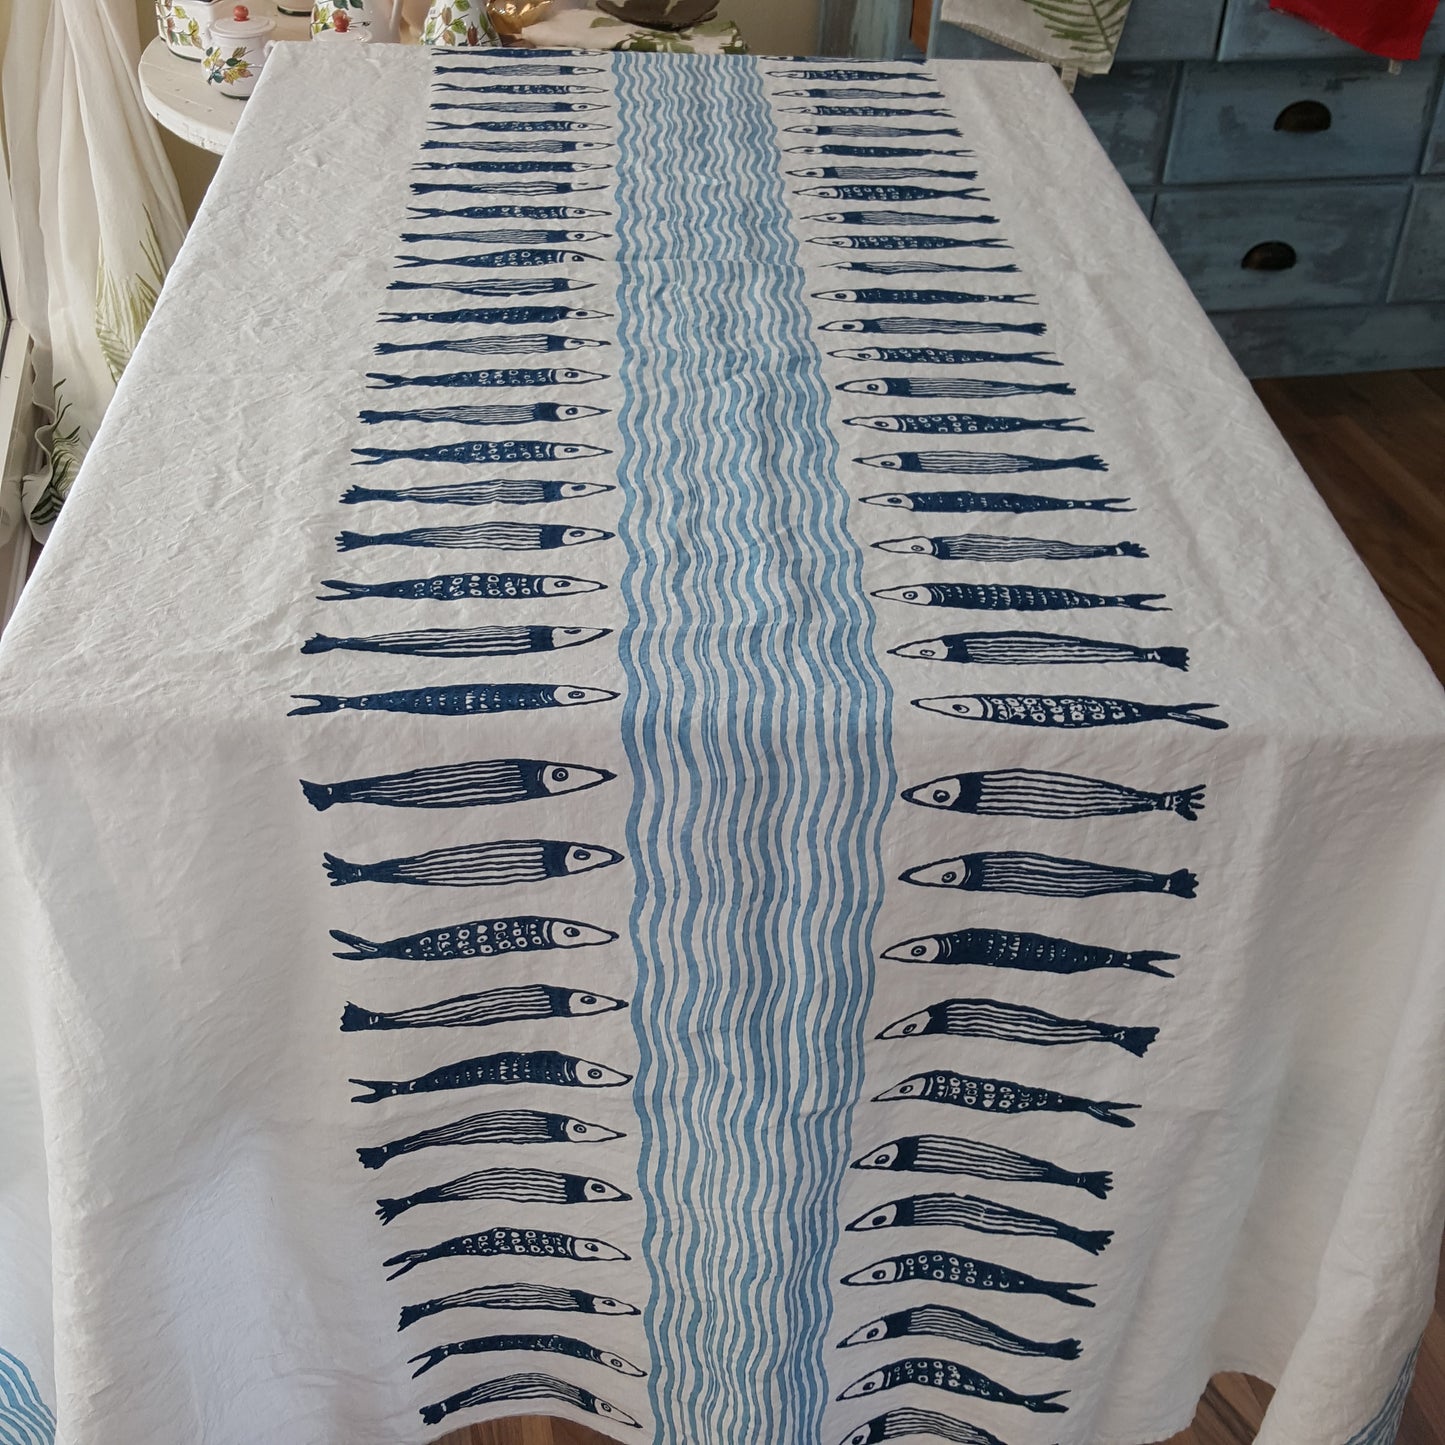 Natural linen tablecloth with orange fork print